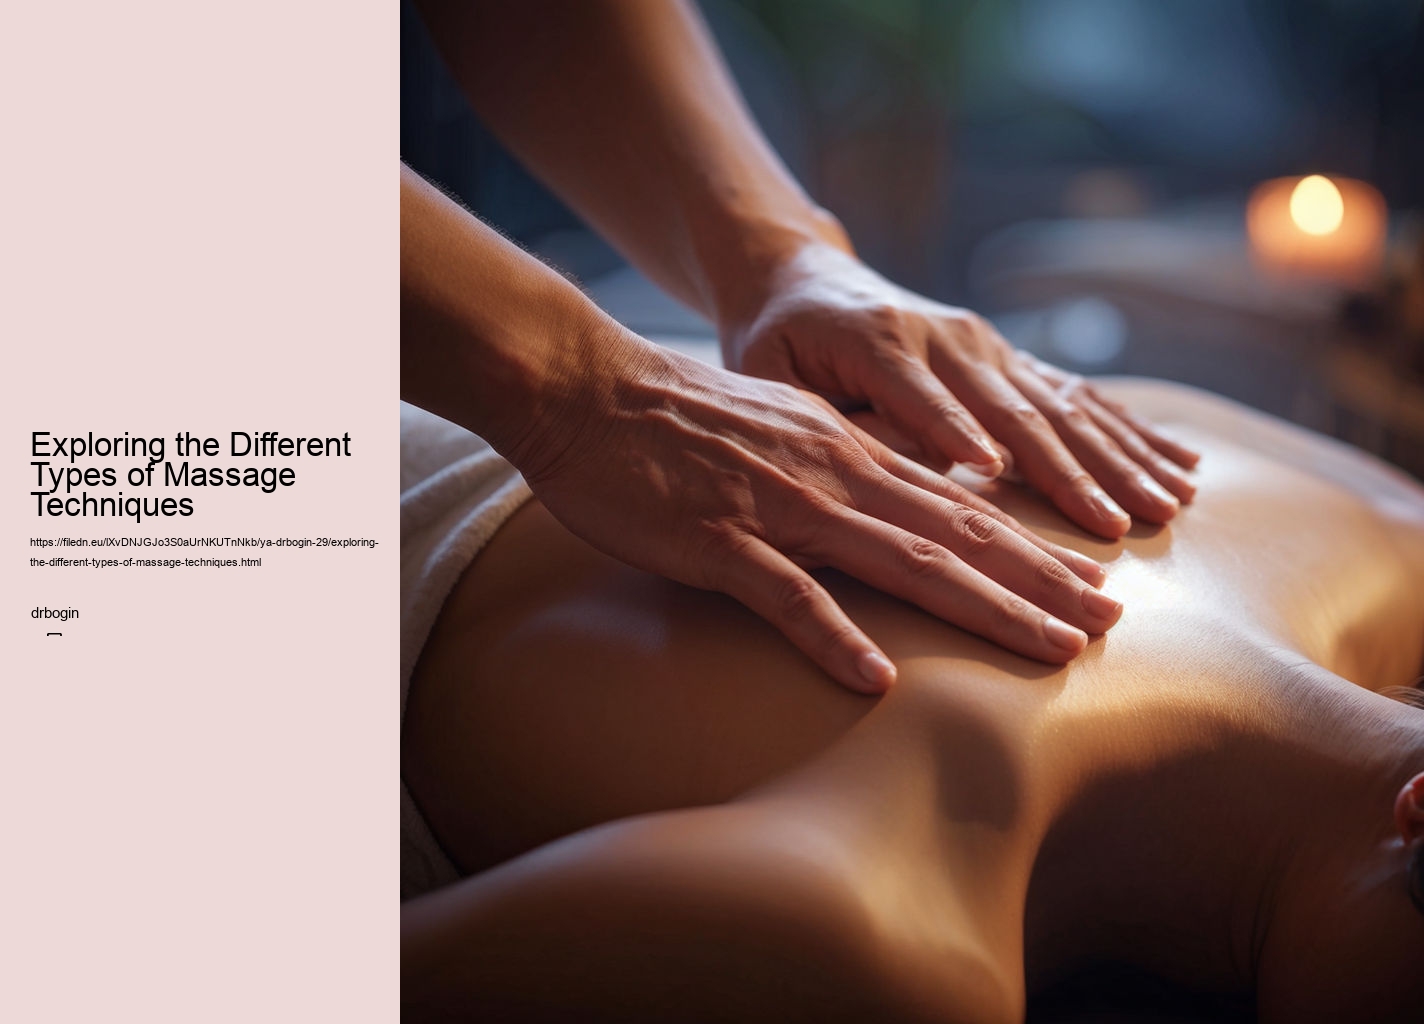 Exploring the Different Types of Massage Techniques